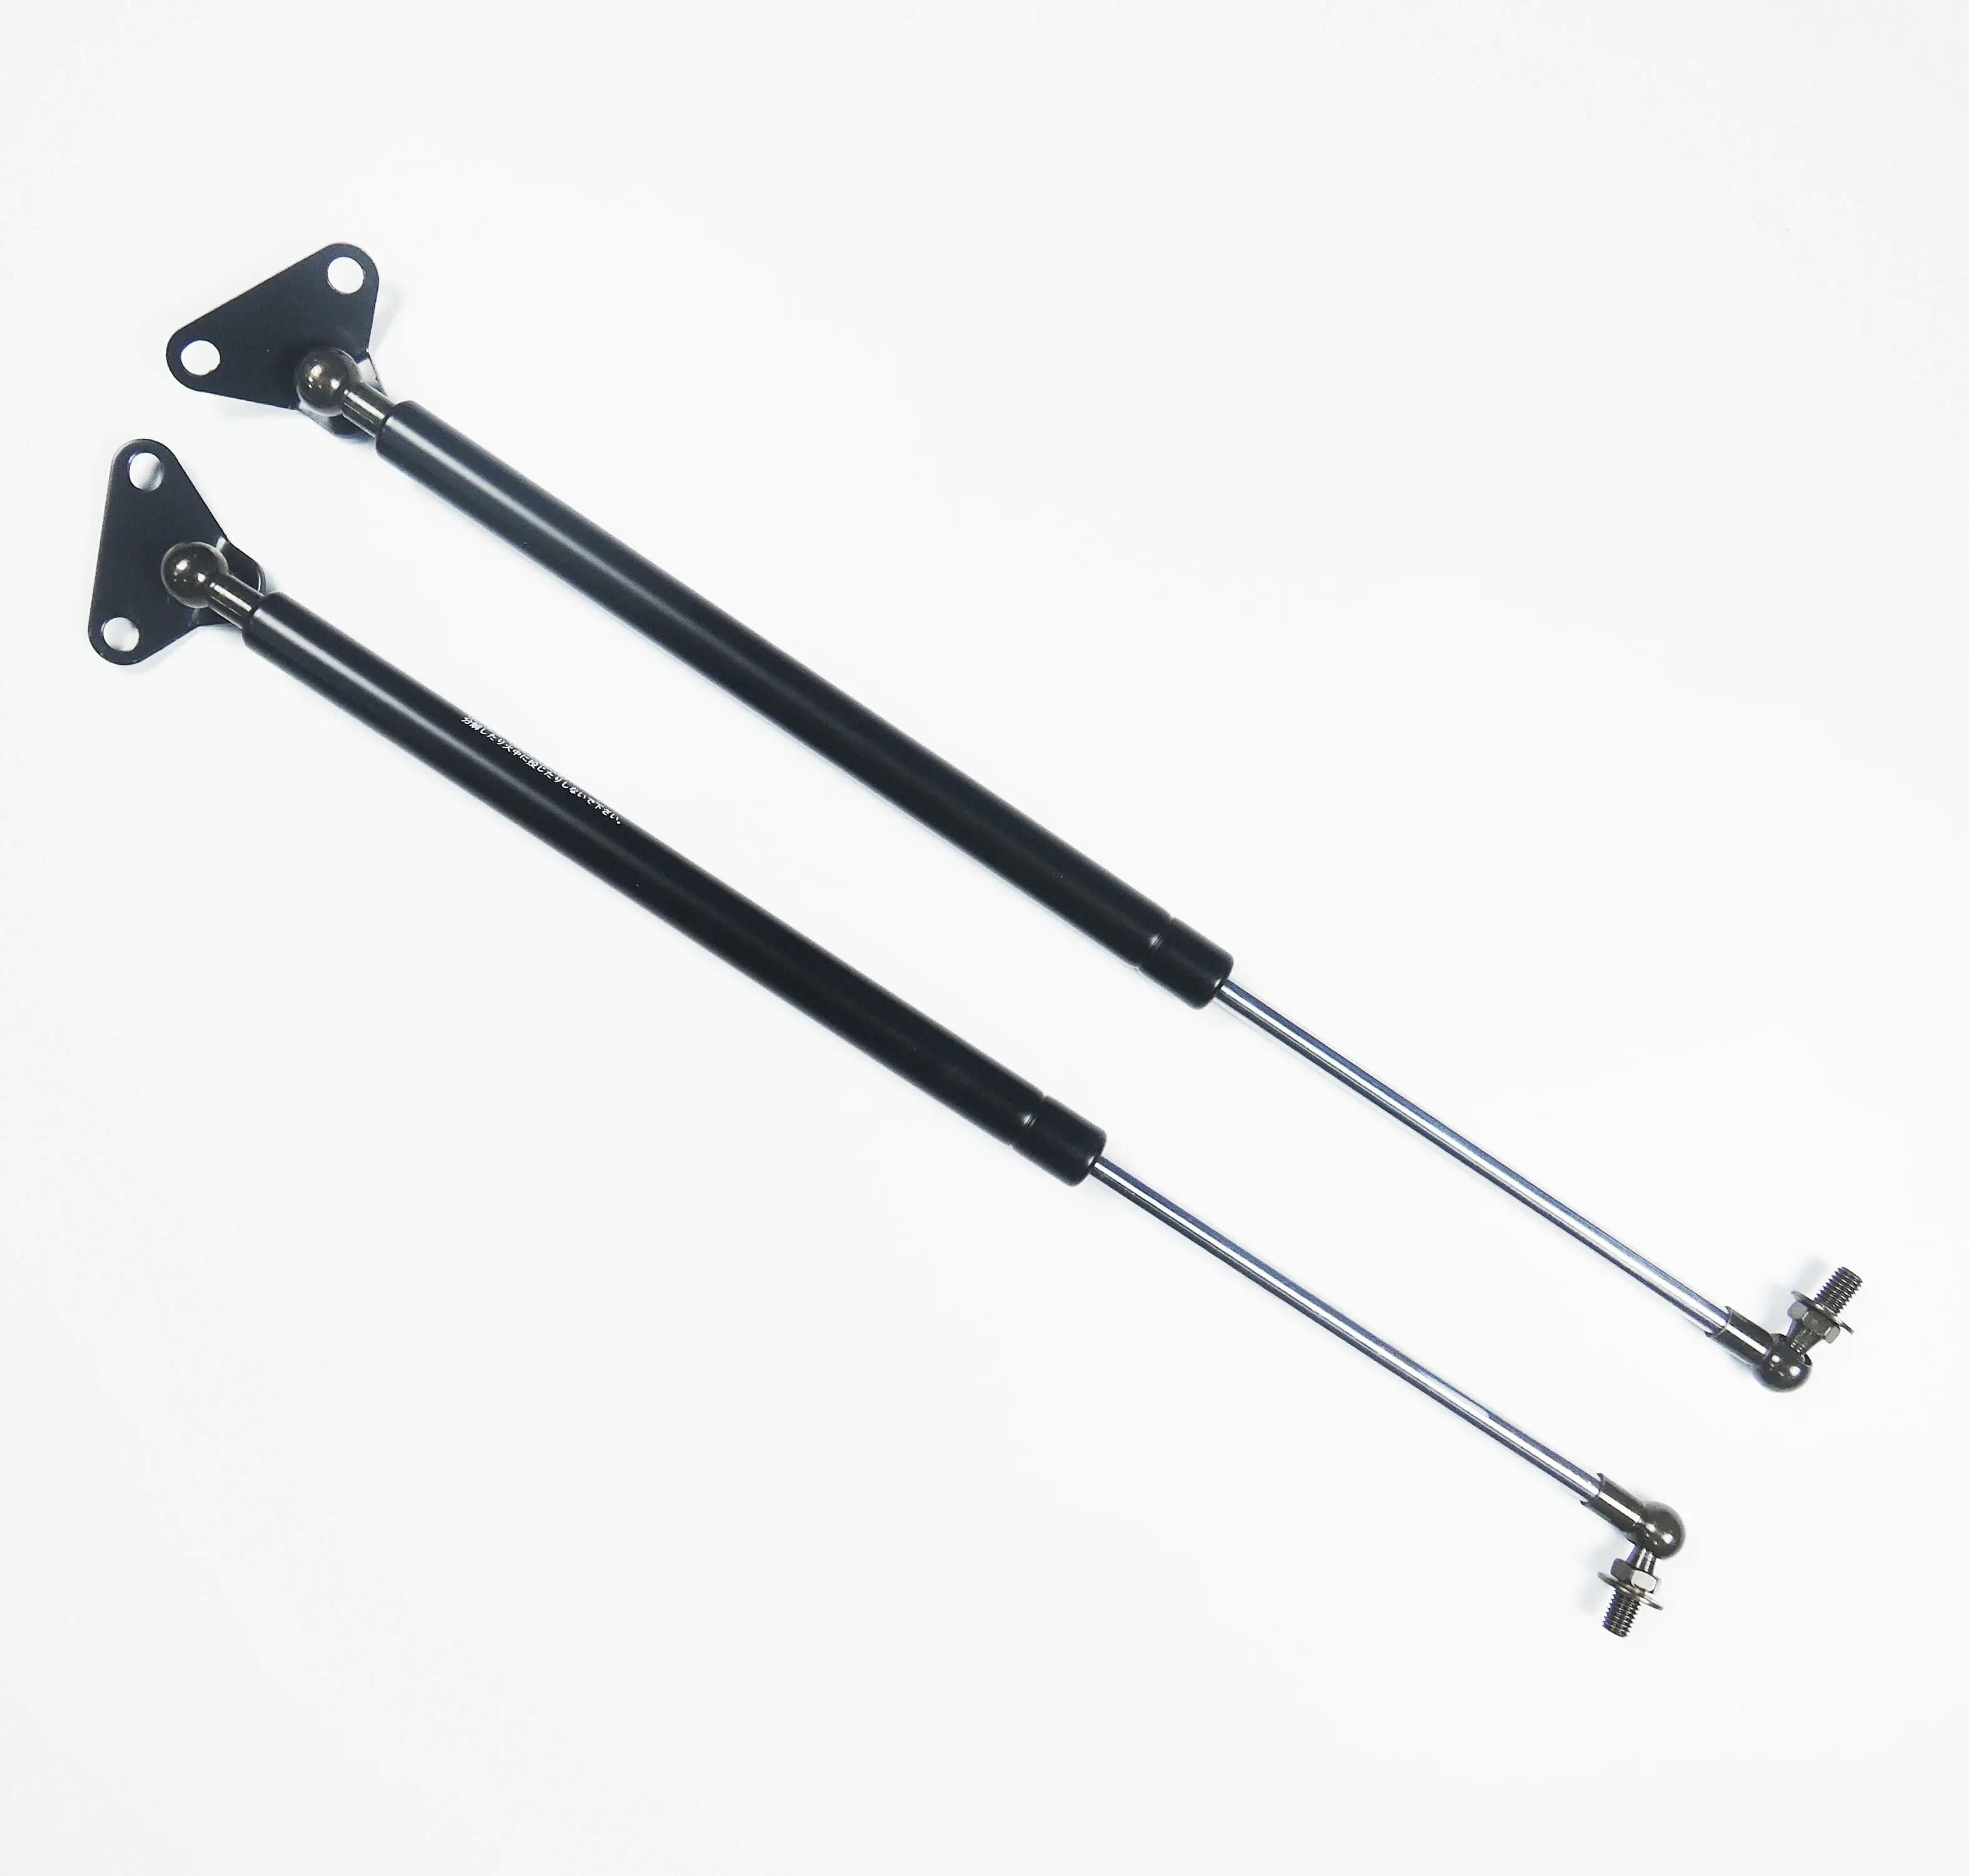 68950-69105 hot sale Rear Hood Lift Supports Damper Gas Spring For Toyota Land cruiser 2007-2011 Lexus